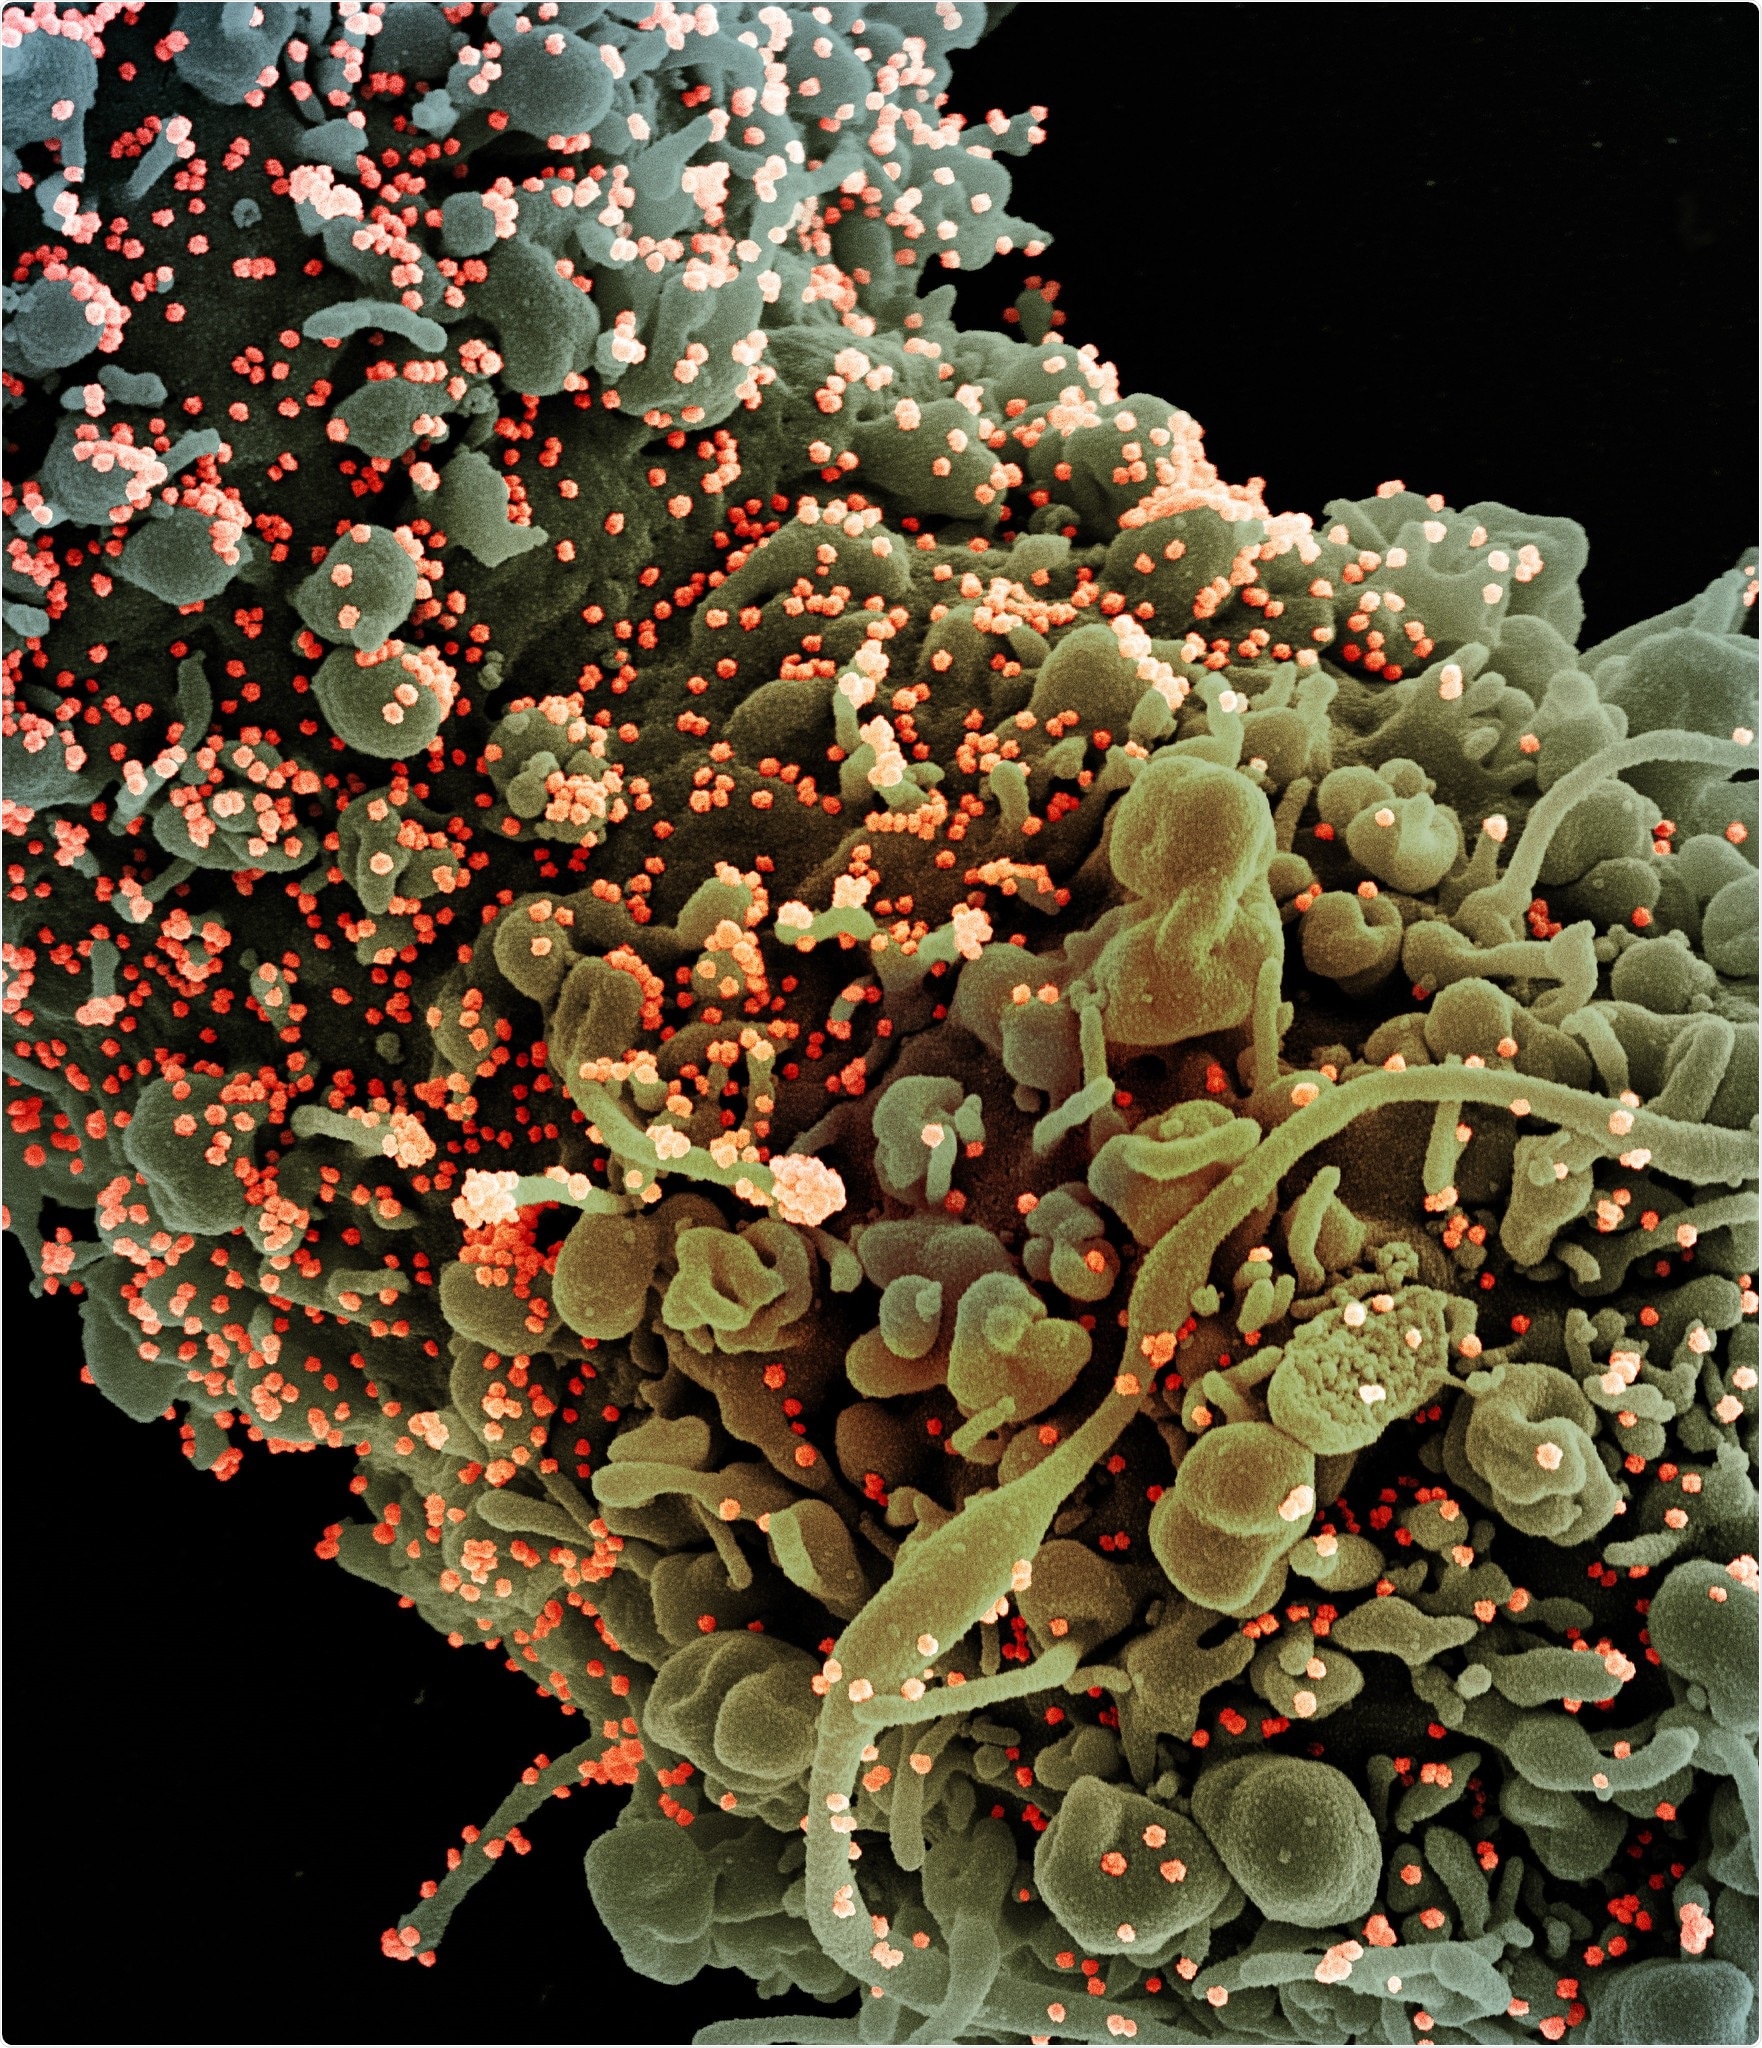 Colorized scanning electron micrograph of a cell showing morphological signs of apoptosis, infected with SARS-COV-2 virus particles (orange), isolated from a patient sample. Image captured at the NIAID Integrated Research Facility (IRF) in Fort Detrick, Maryland. Credit: NIAID/NIH